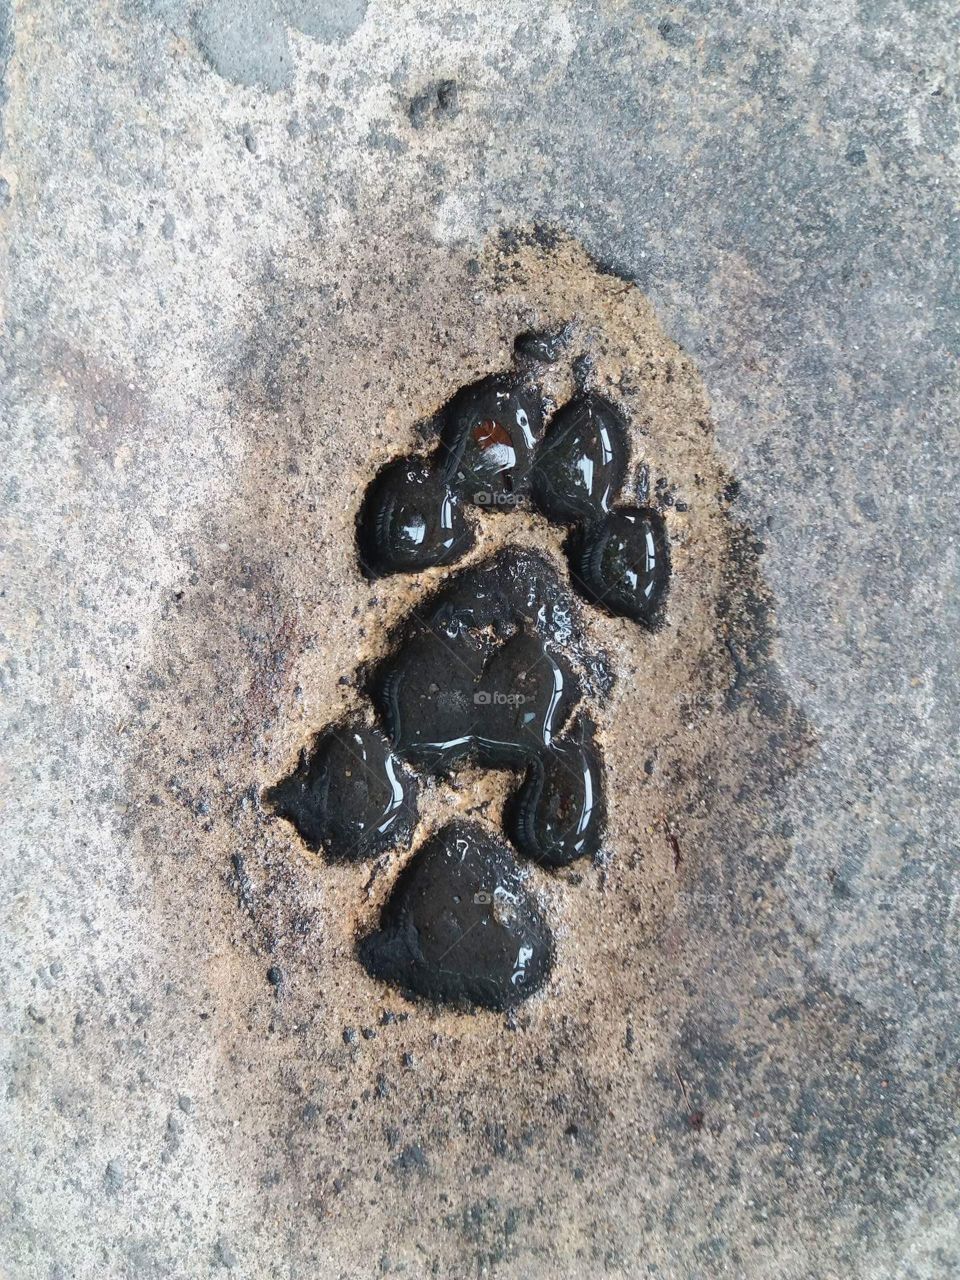 Flooding in the Dogs' footprint on the concrete way